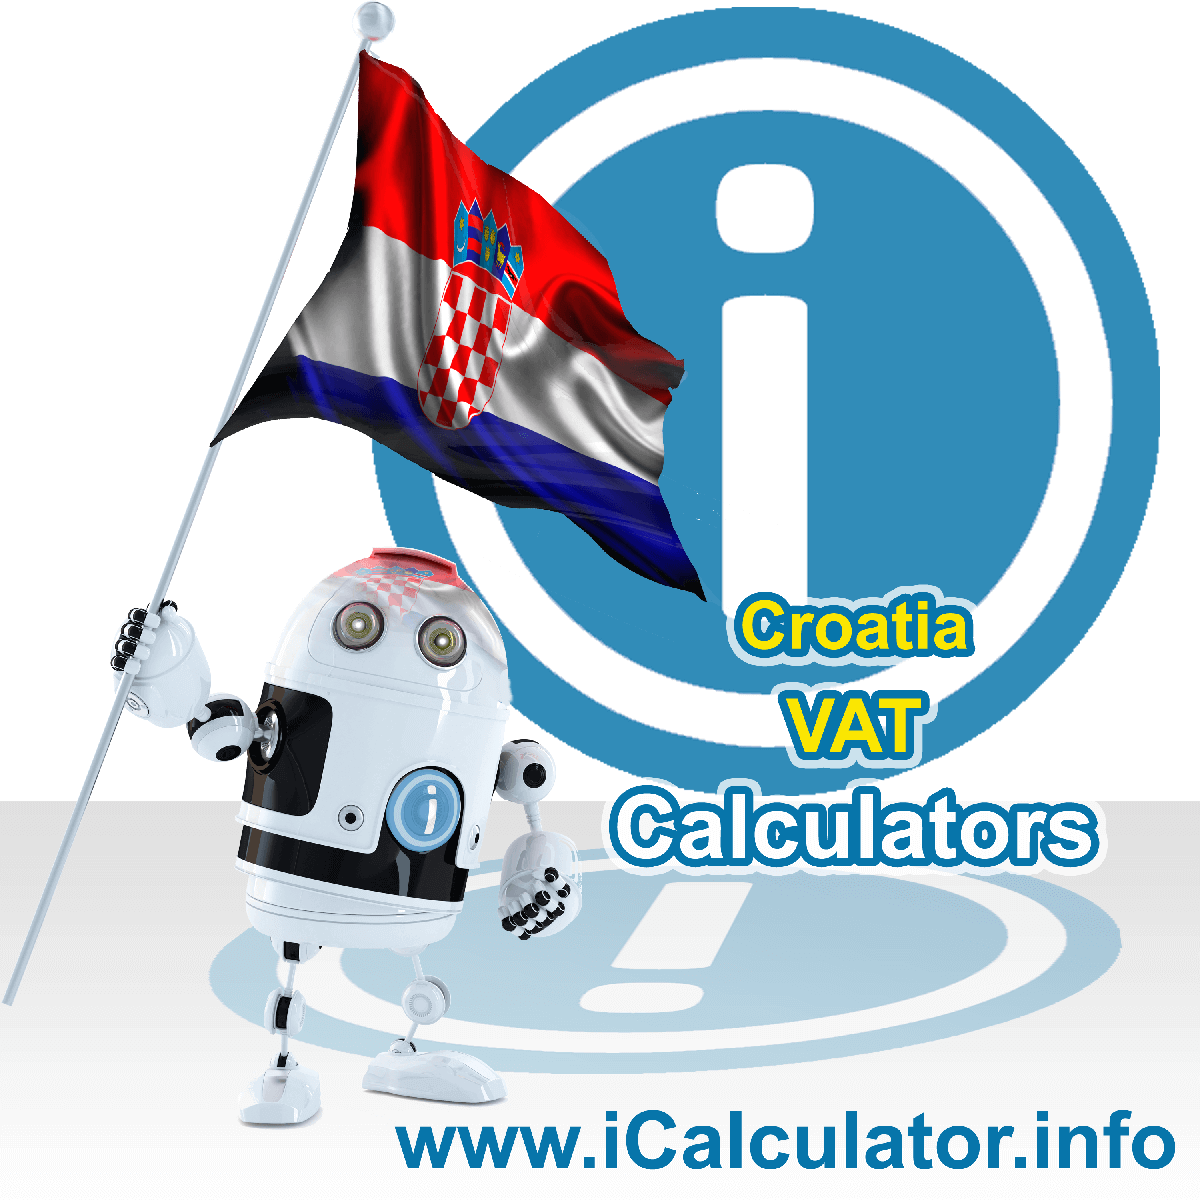 Croatia VAT Calculator. This image shows the Croatia flag and information relating to the VAT formula used for calculating Value Added Tax in Croatia using the Croatia VAT Calculator in 2023